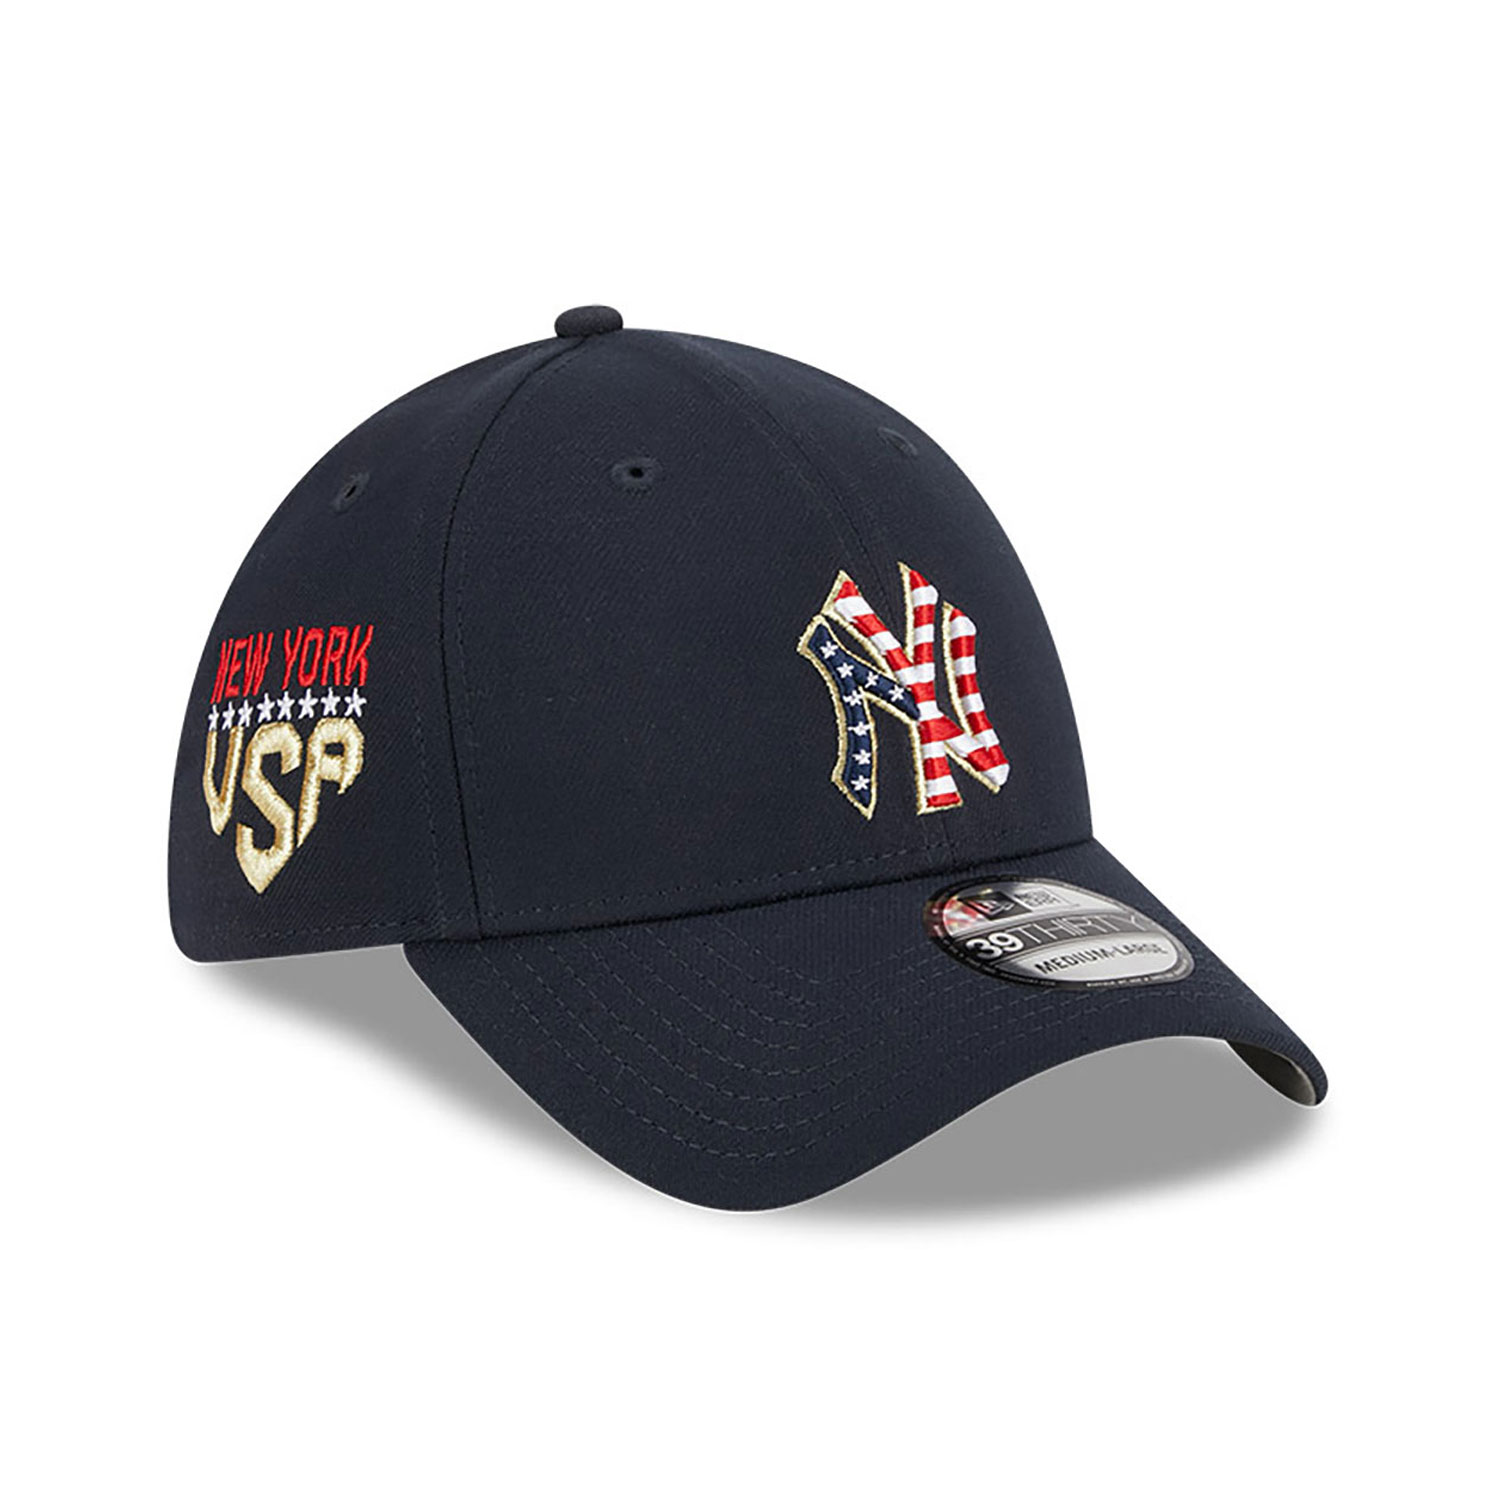 Stars and Stripes: Get your Detroit Tigers July 4th hats now